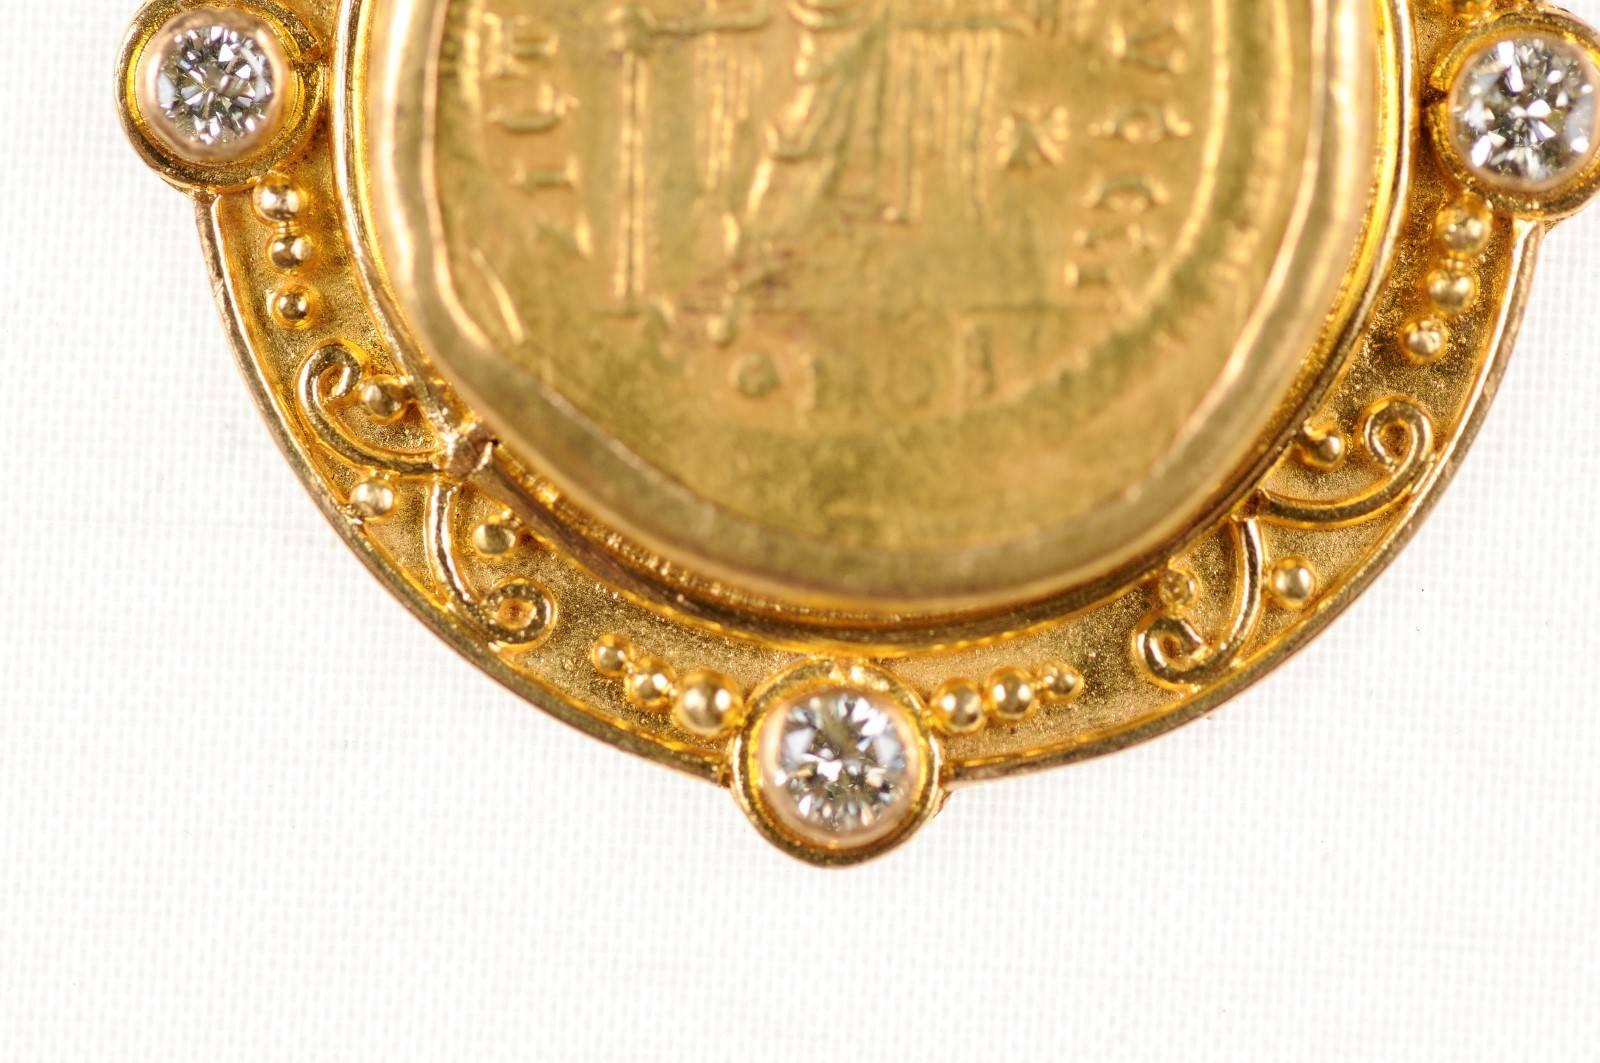 18th Century and Earlier Justinian I, AV Roman Coin Necklace with 22-Karat Gold Bezel and Diamond Accents